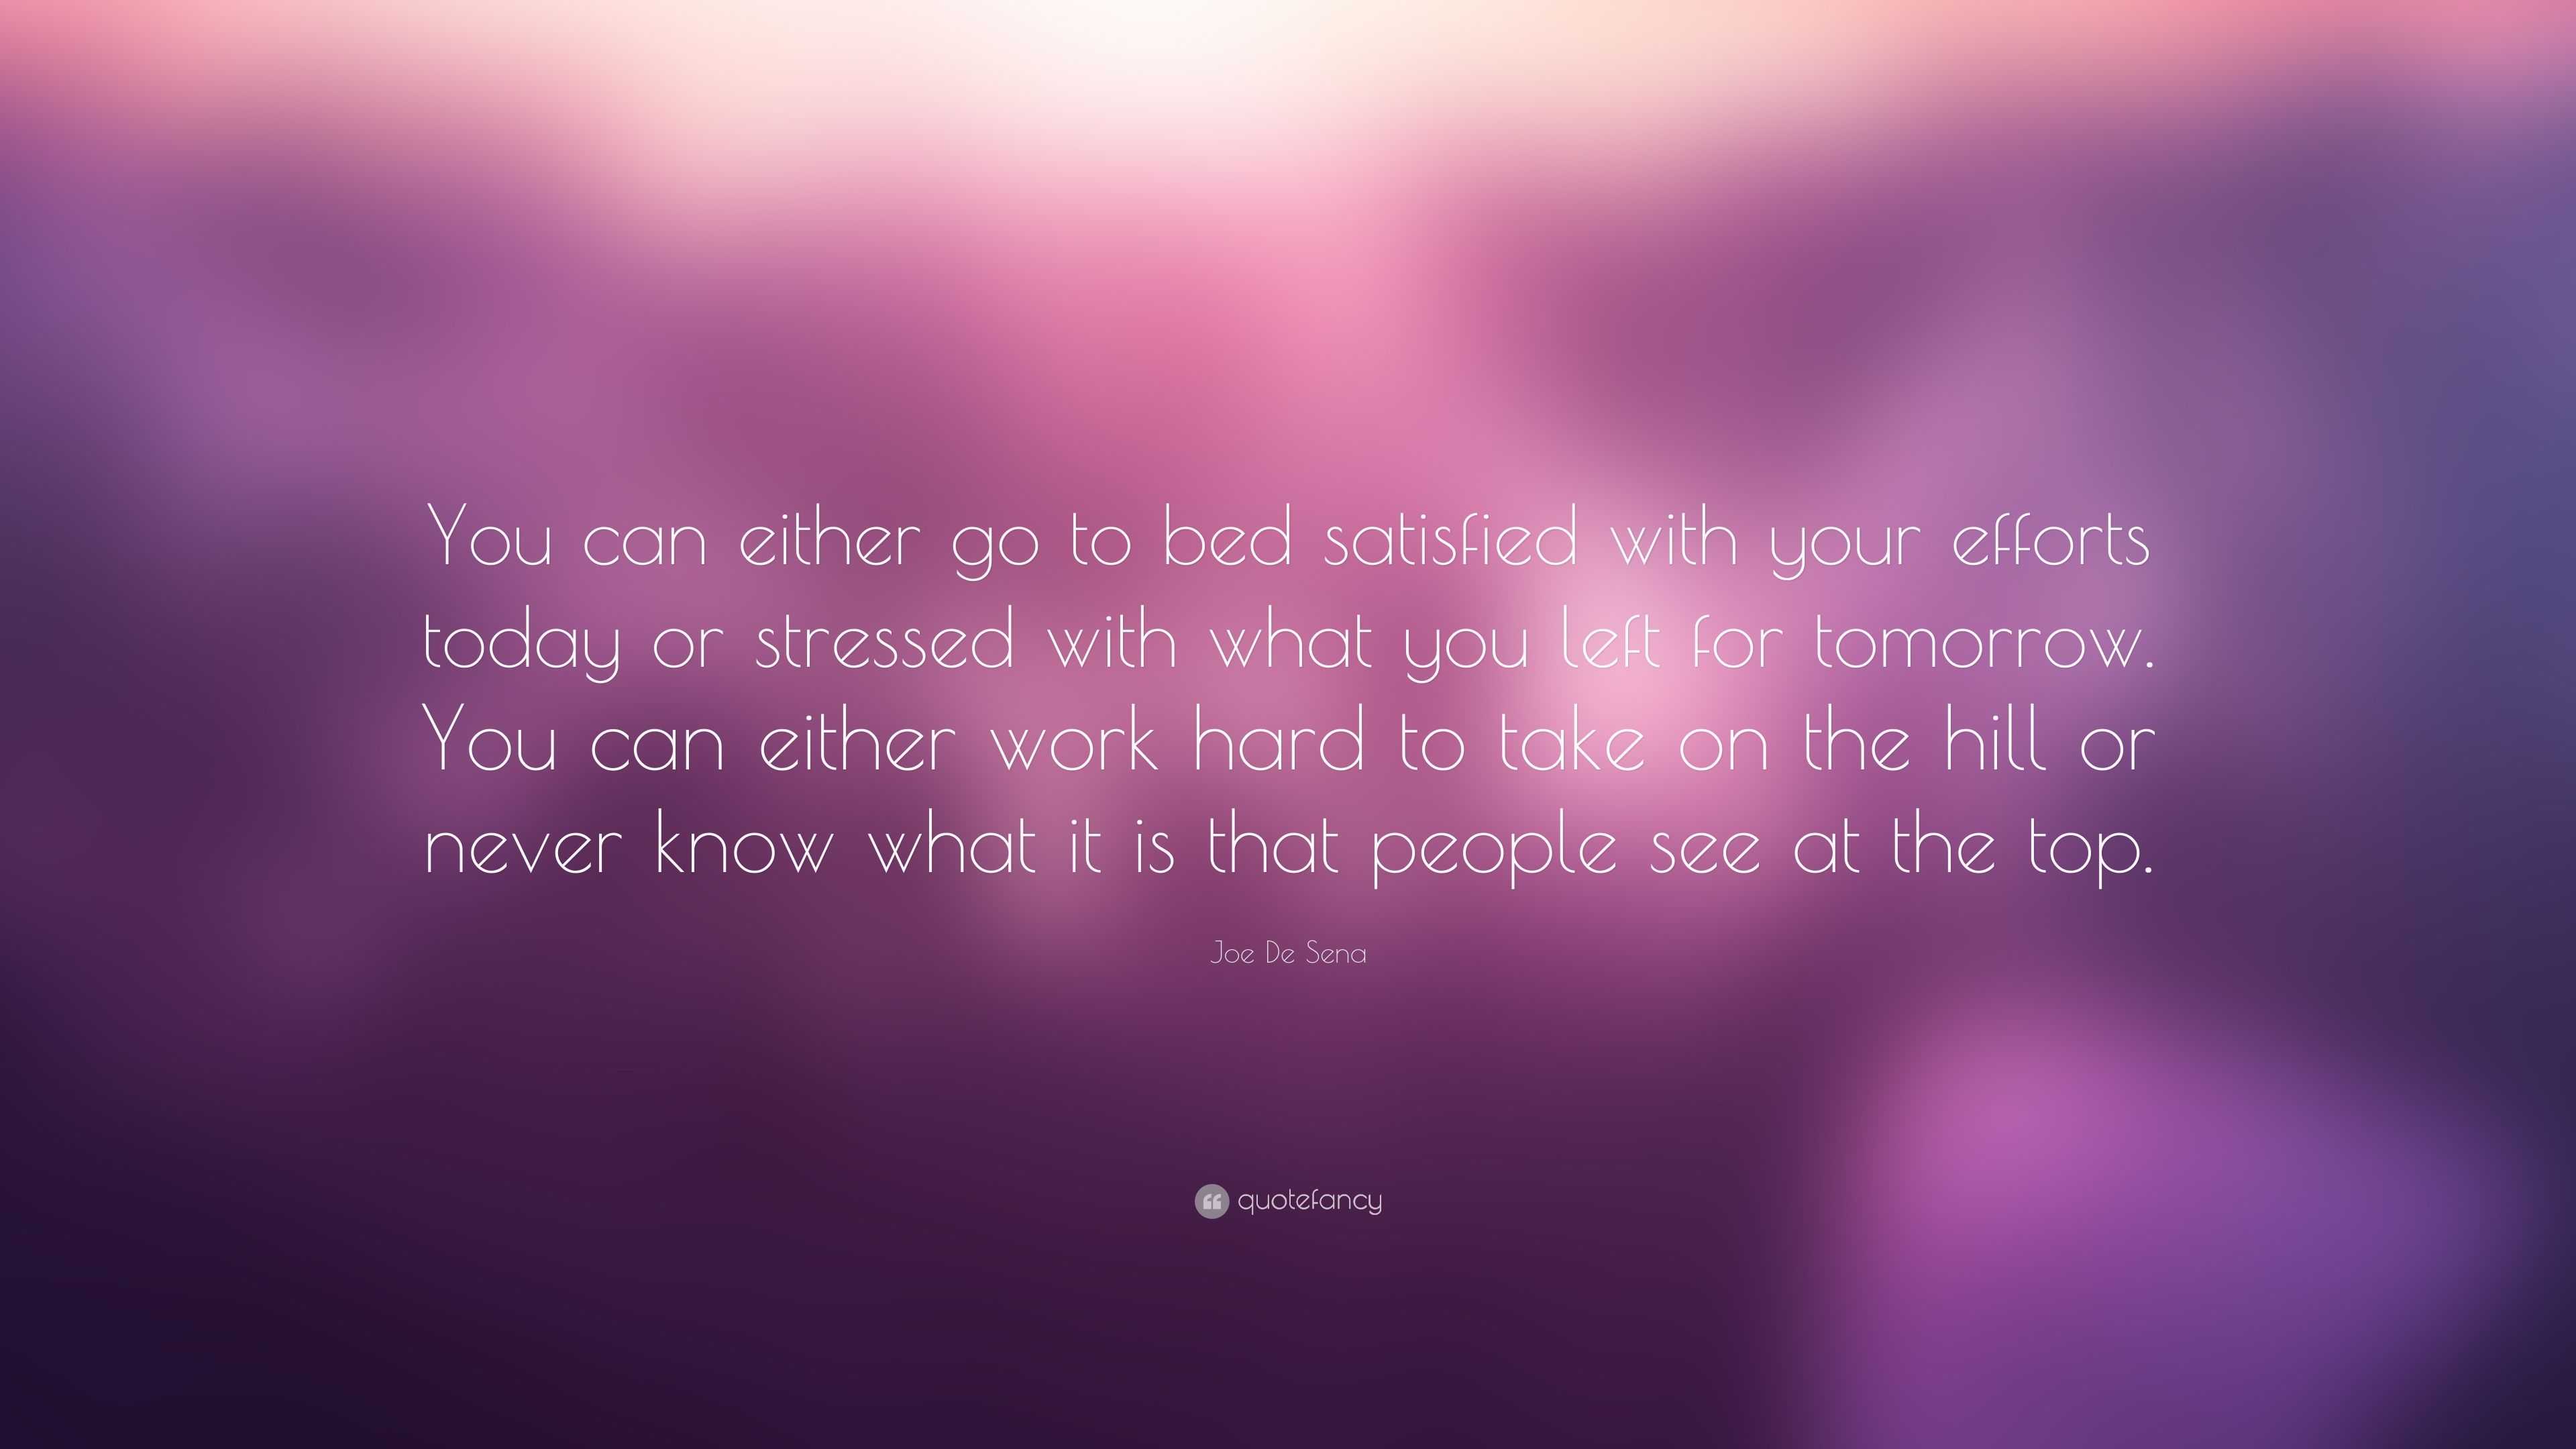 Joe De Sena Quote: “You can either go to bed satisfied with your ...